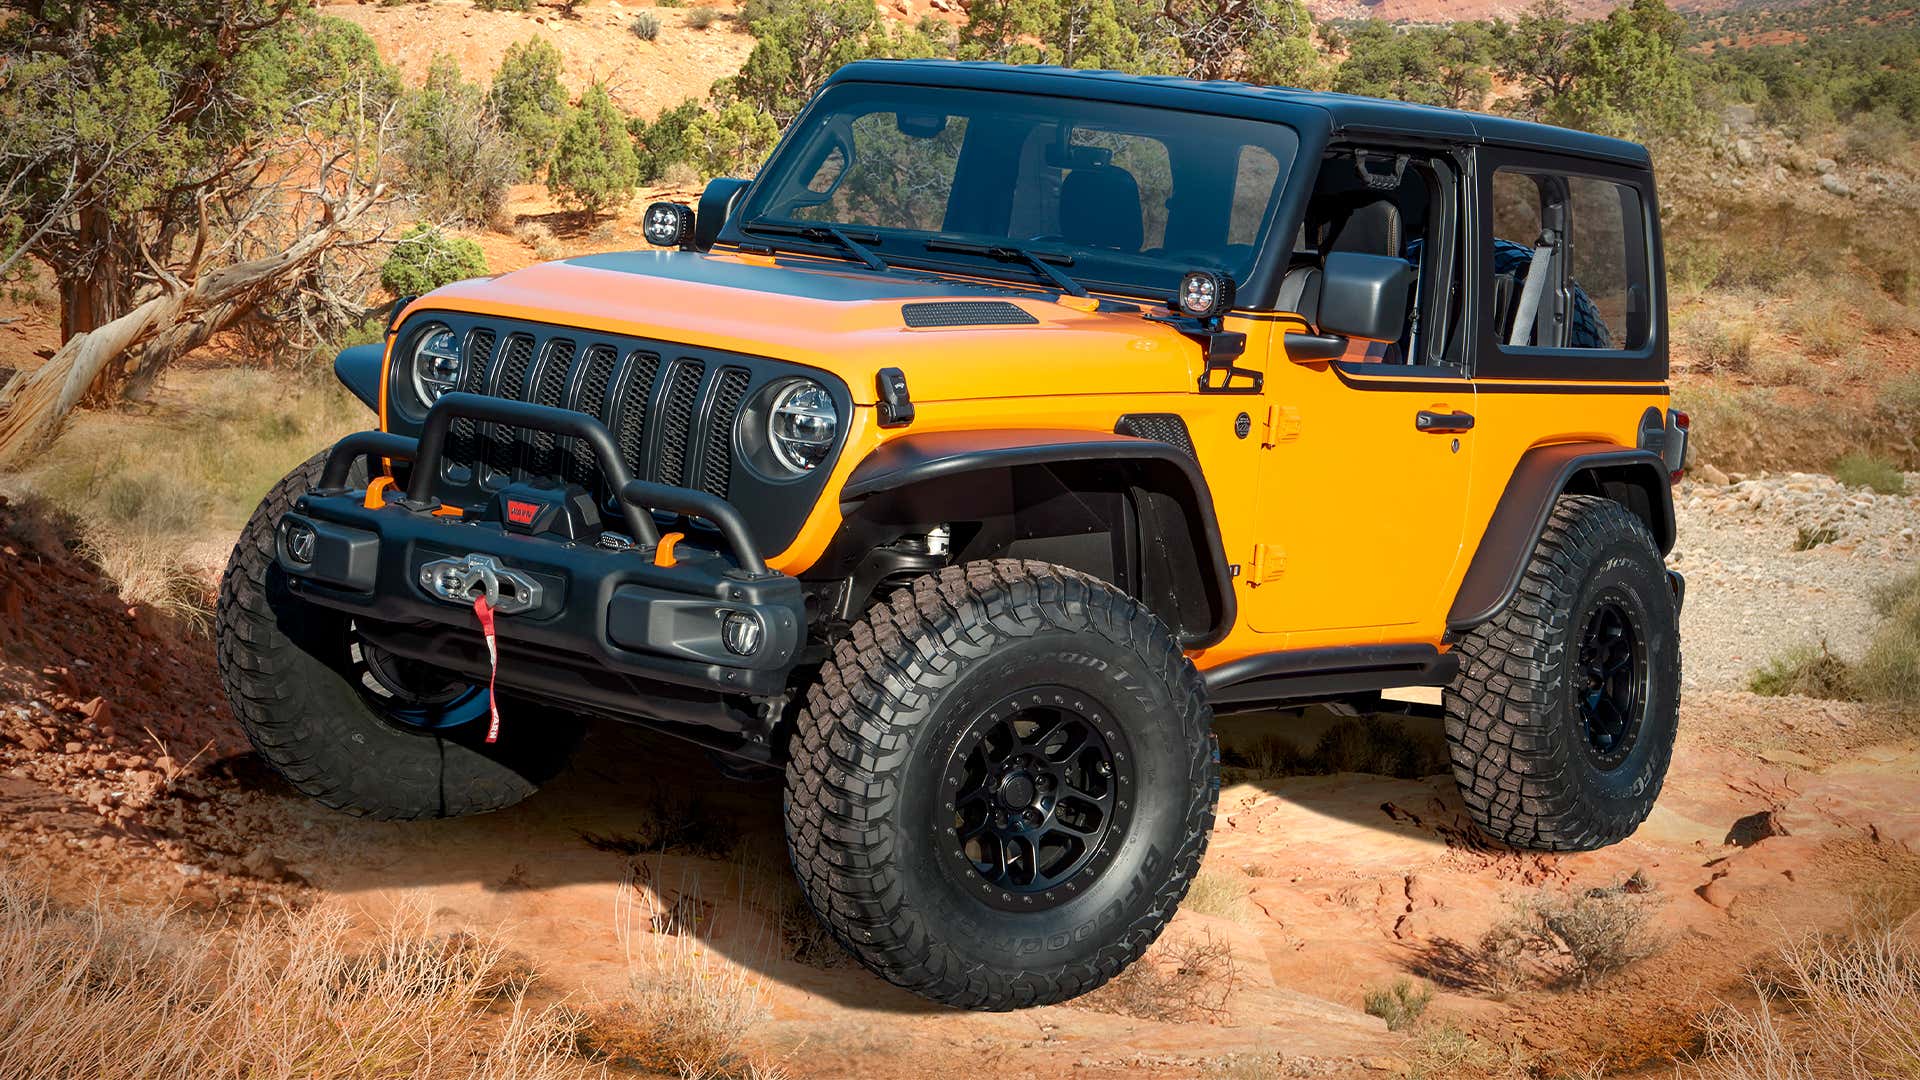 Jeep Now Offers Gorilla Glass Windshields for Wrangler and Gladiator